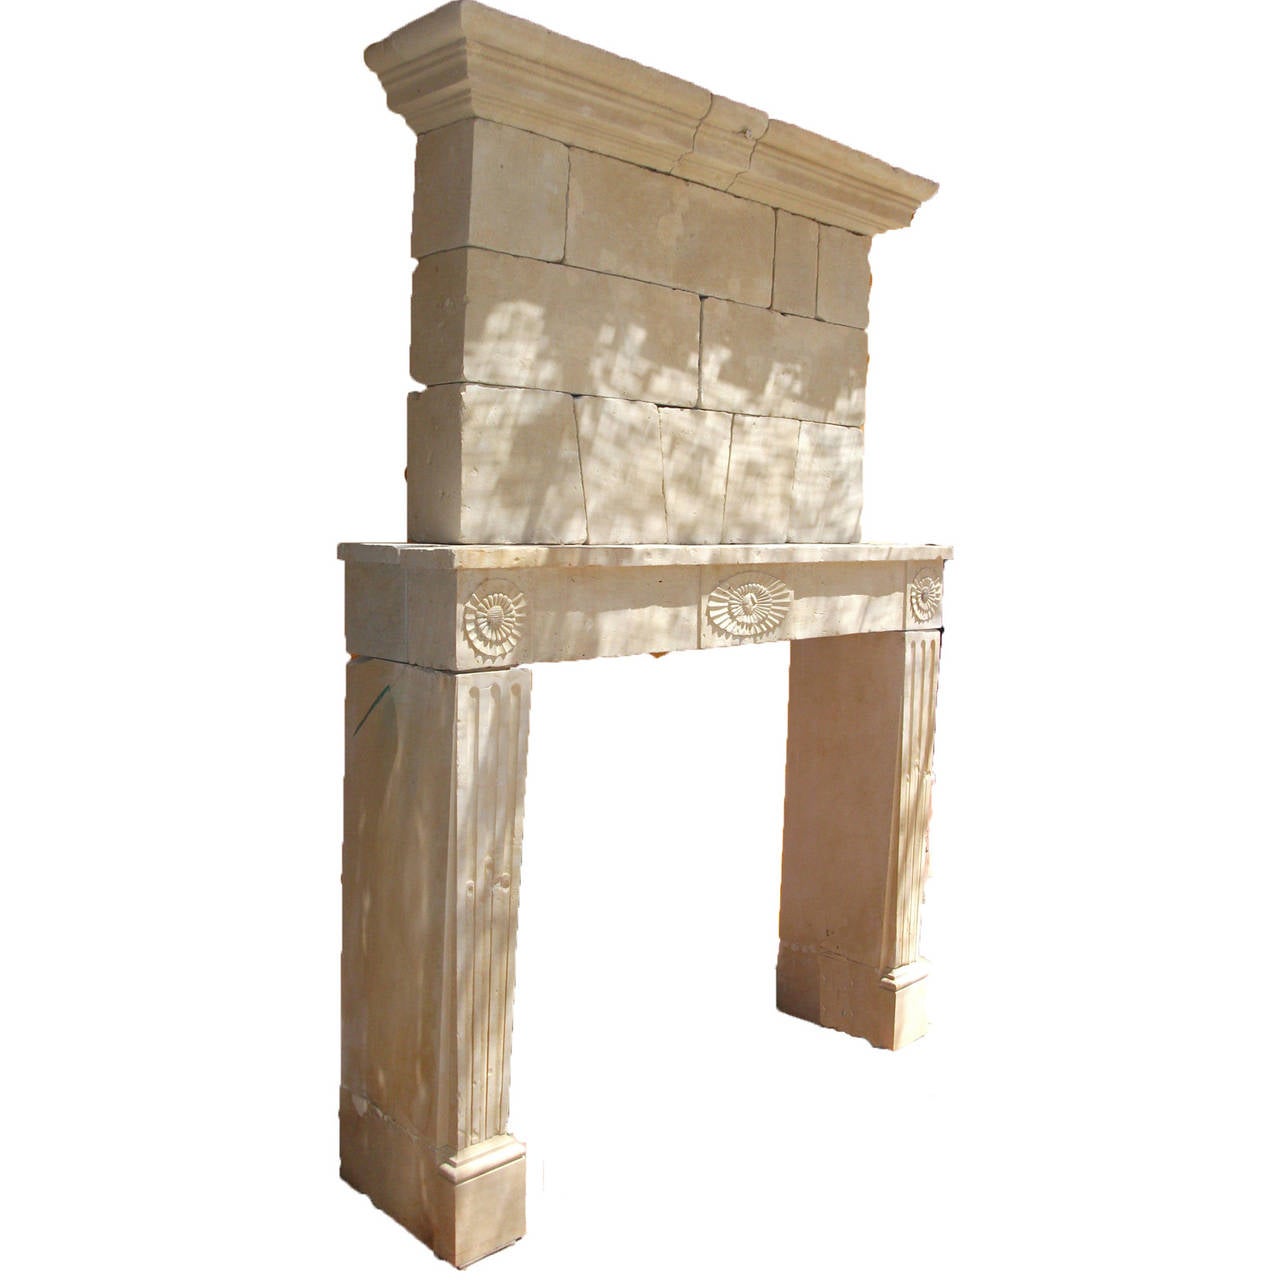 Antique French Limestone fireplace. This Louis XVI style fireplace with pier/trumeau is handcrafted in limestone. This limestone fireplace is in good condition and from the 18th century. Carved accents details on the face of the mantel and along the